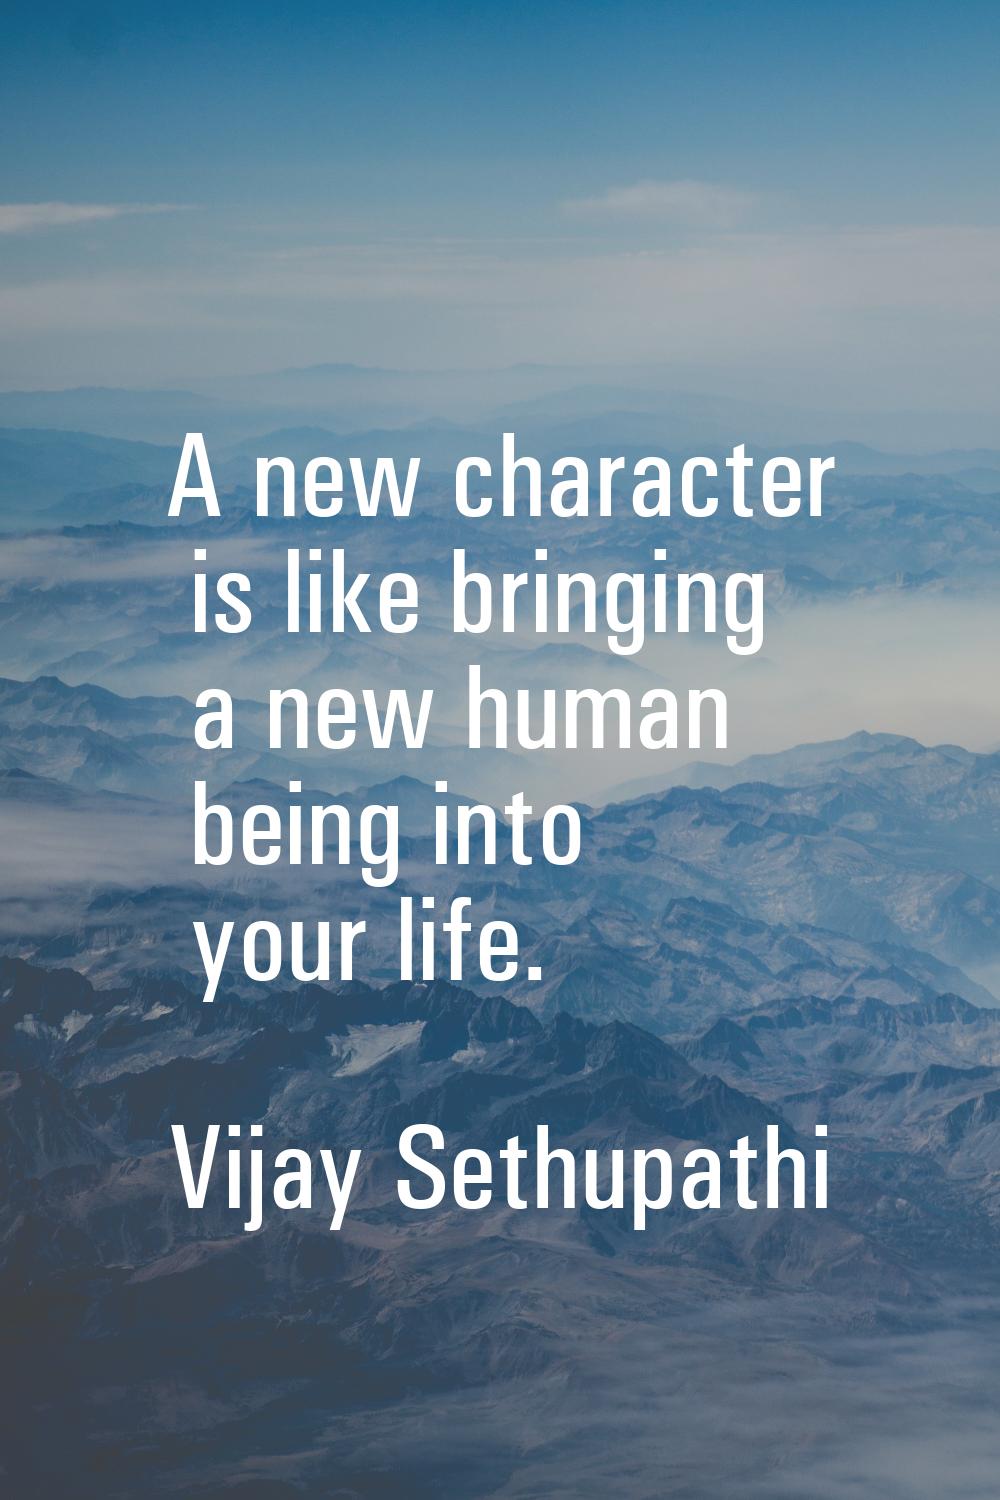 A new character is like bringing a new human being into your life.